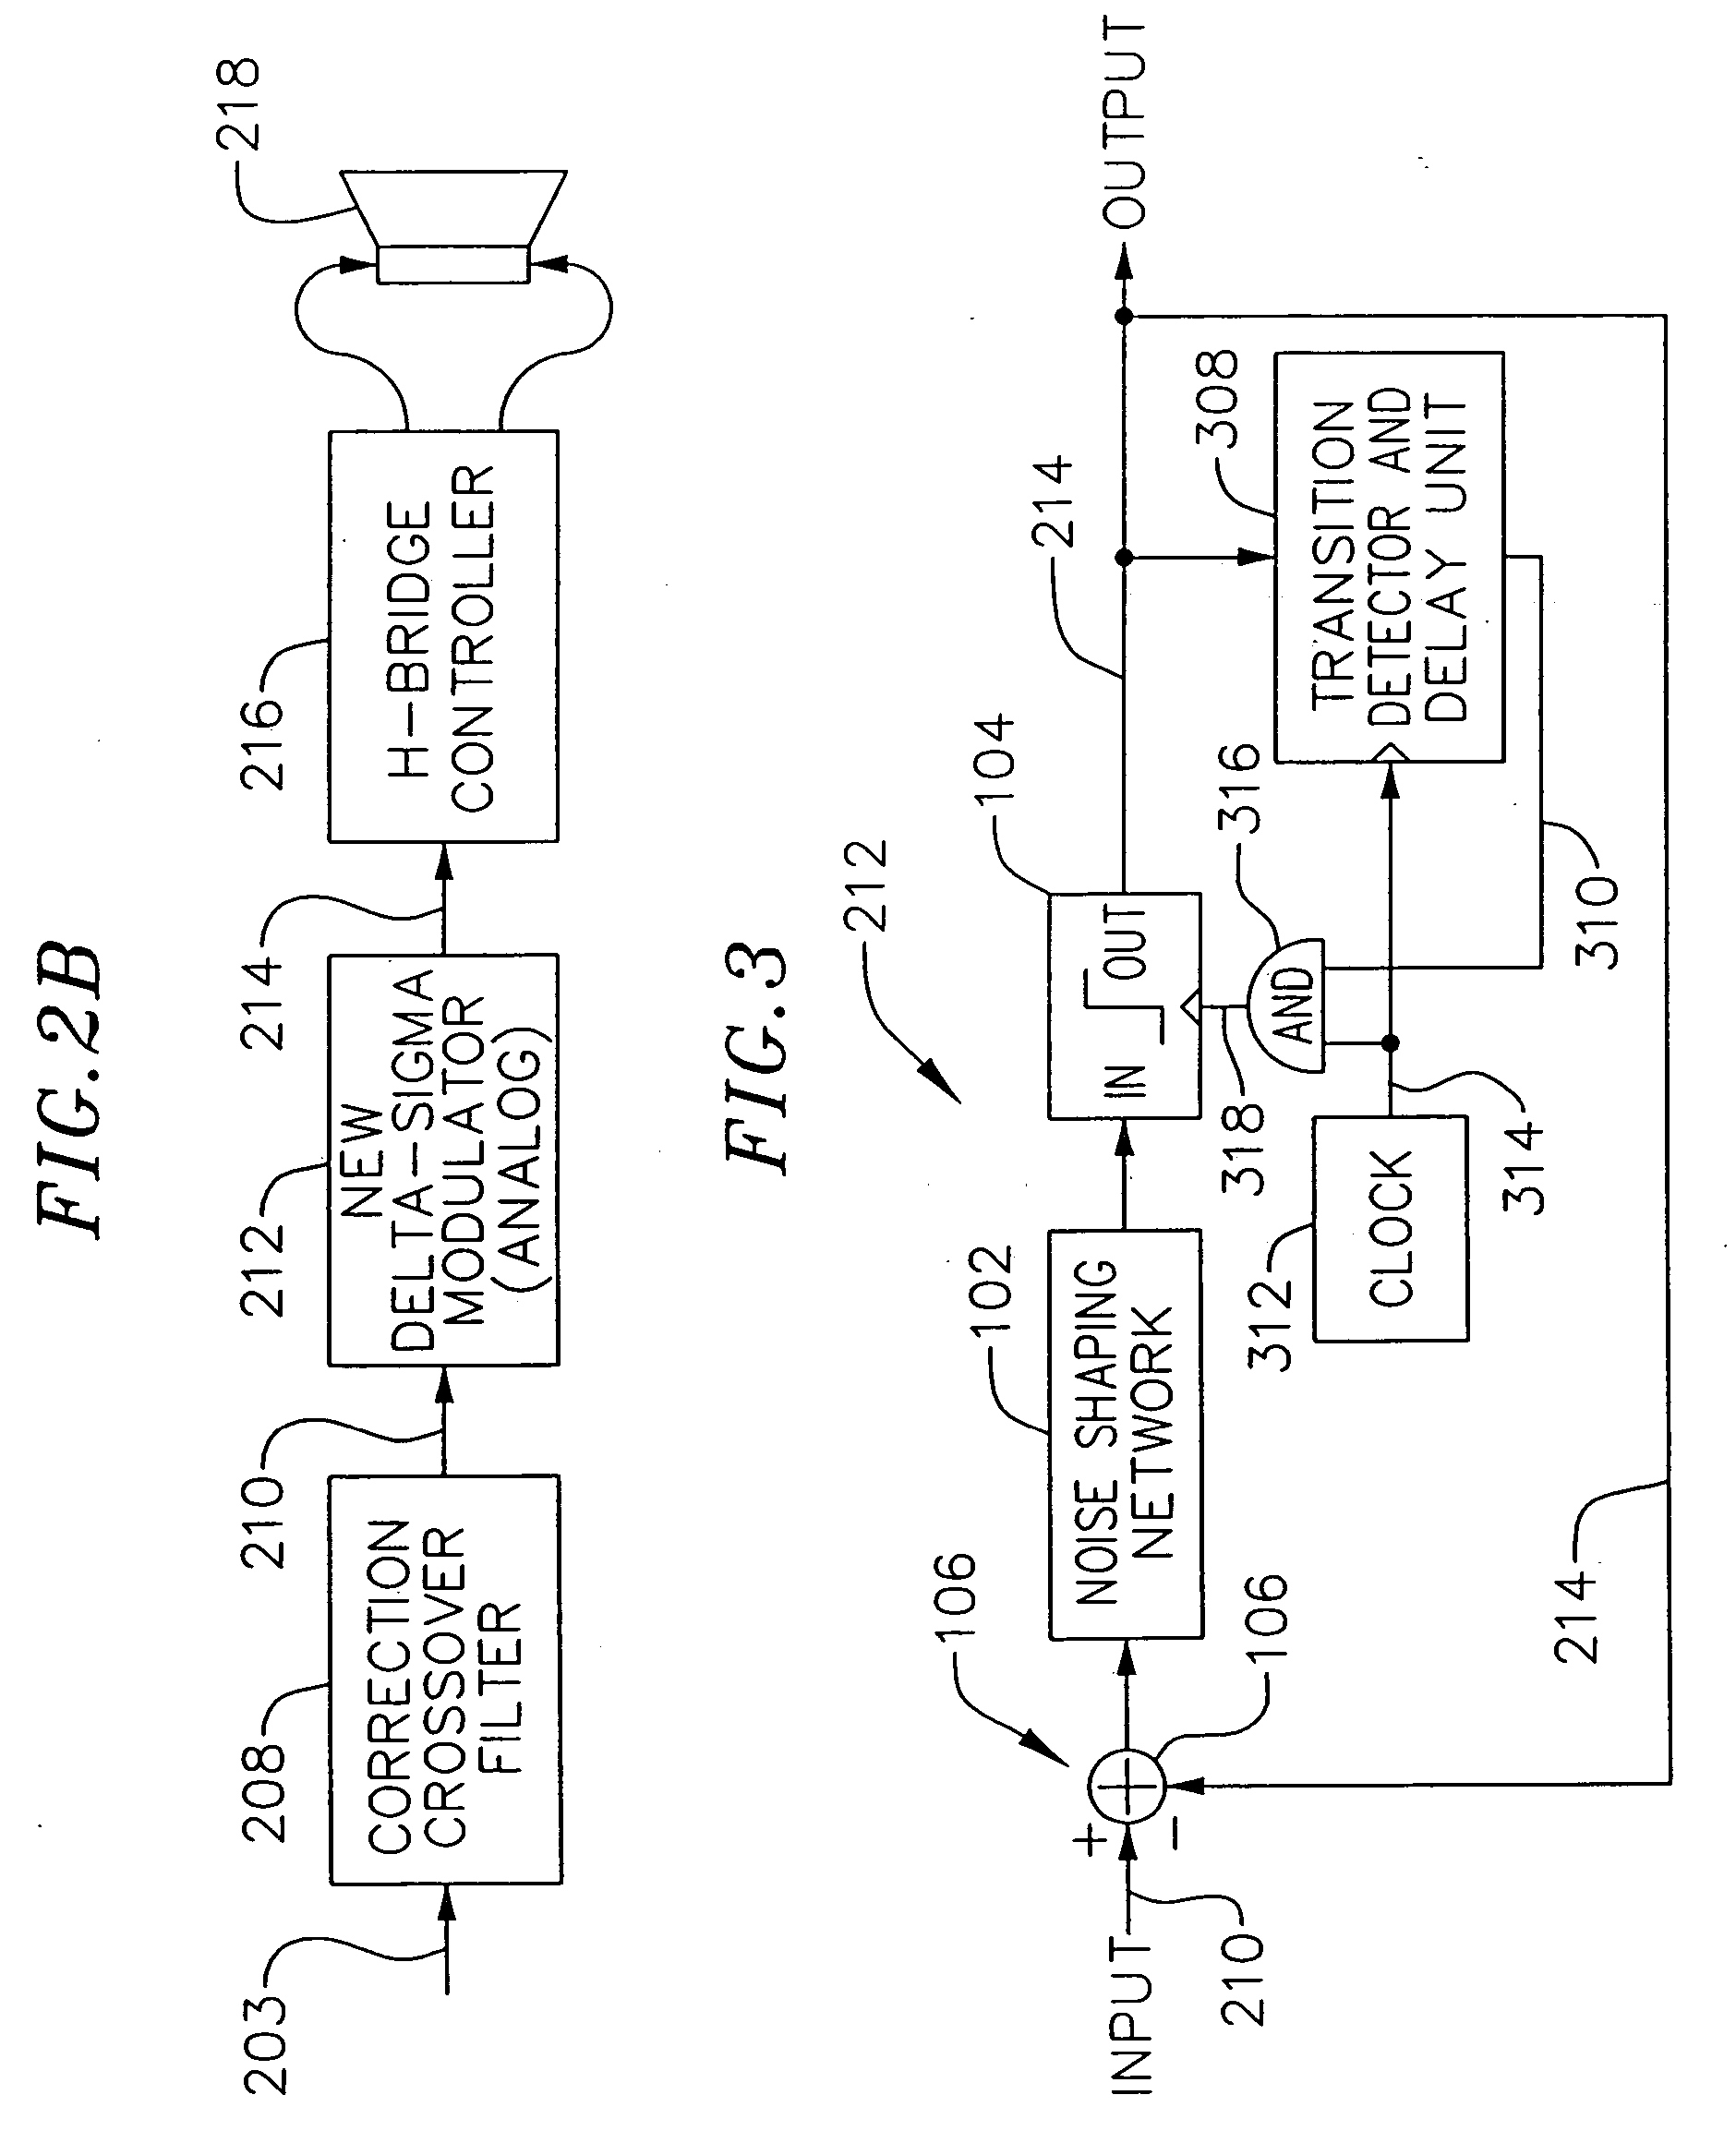 Method and apparatus for efficient mixed signal processing in a digital amplifier